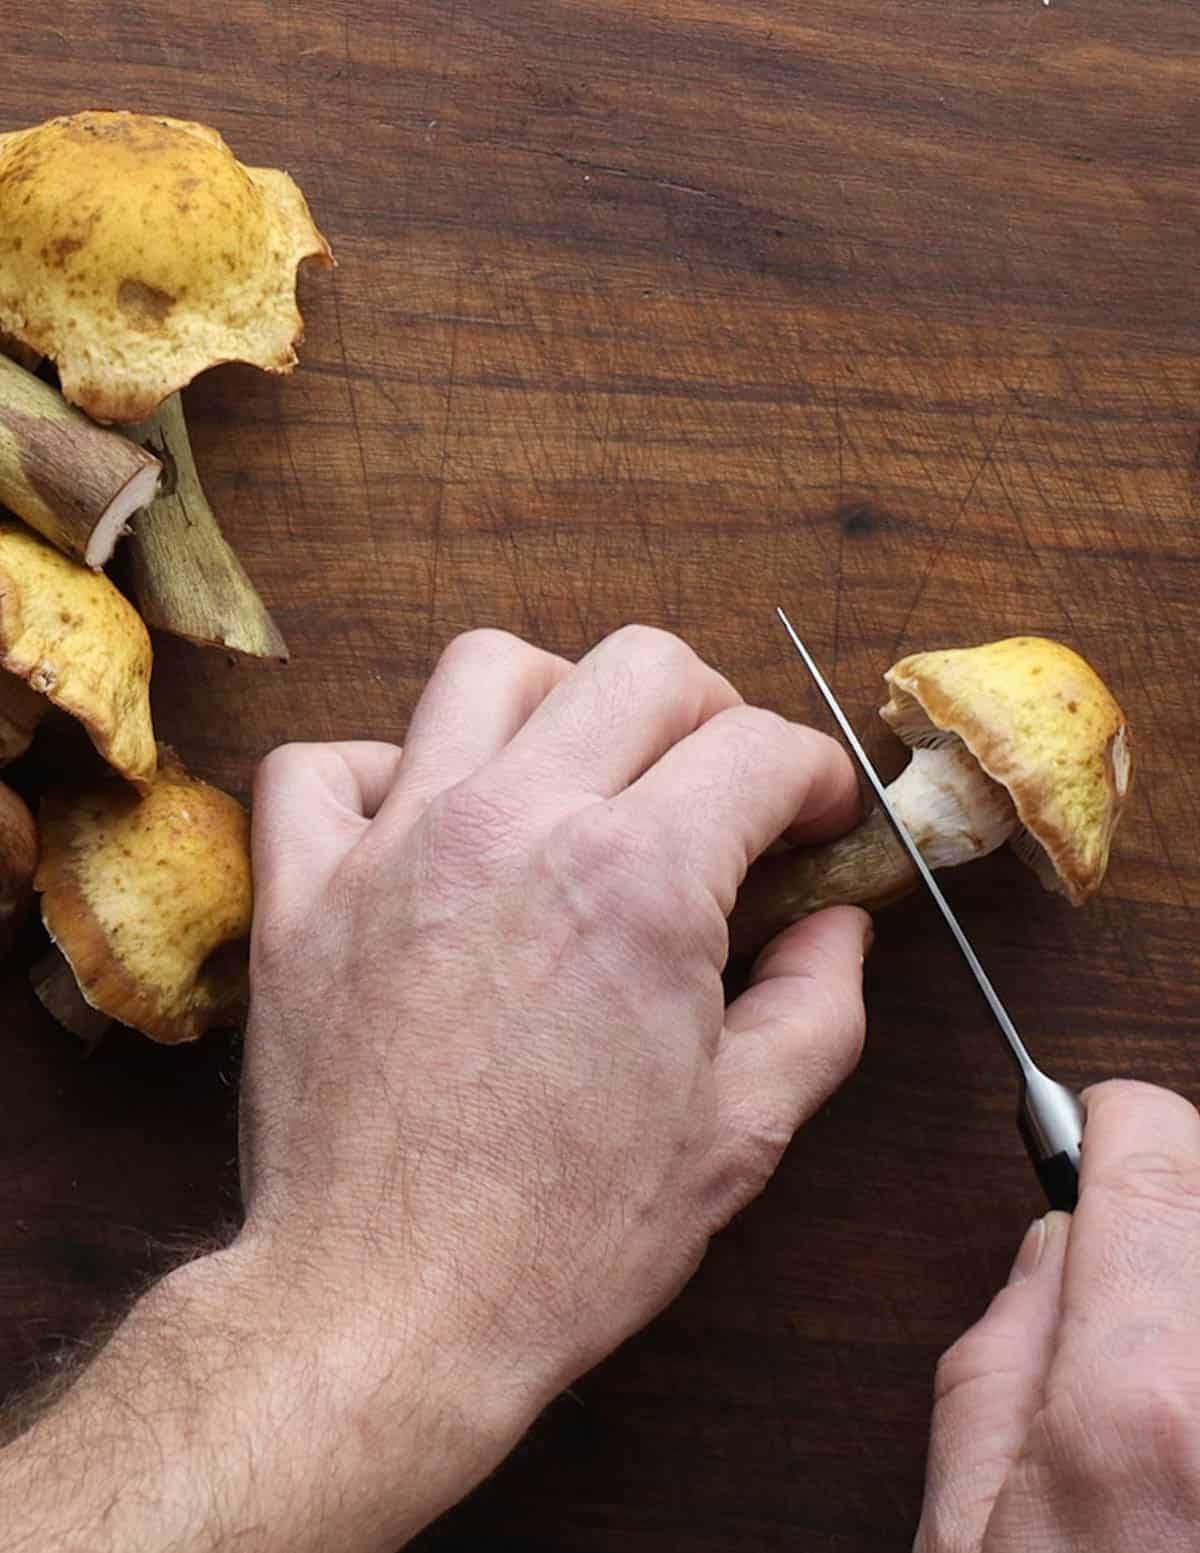 Trimming mushroom stems from the caps. 